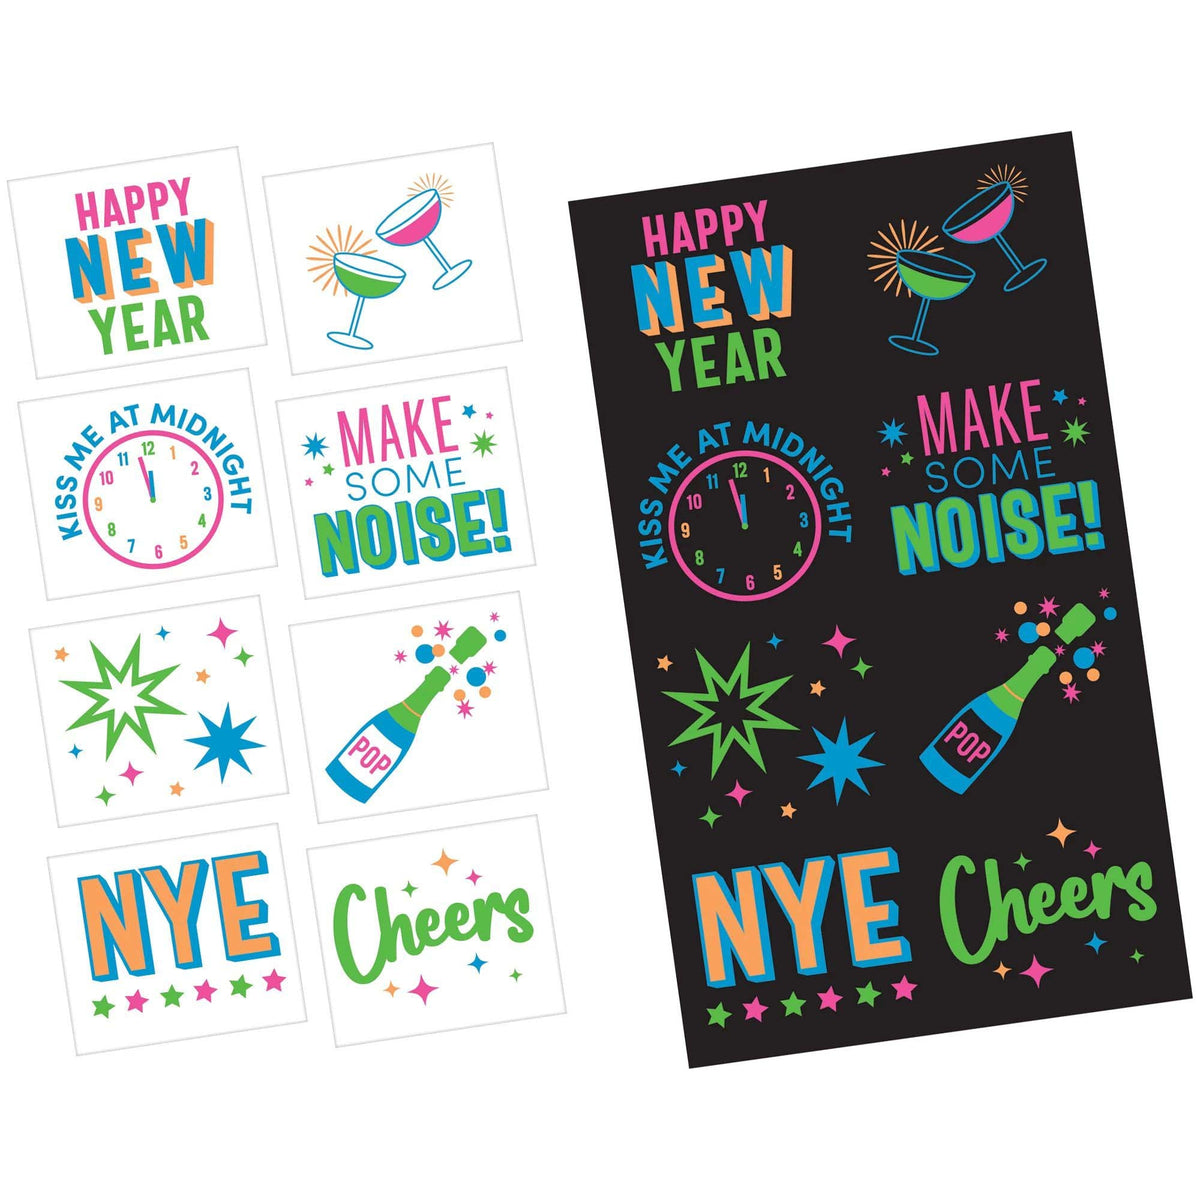 AMSCAN CA New Year New Year Glow-in-the-Dark Tattoo Sheet, 1 Count